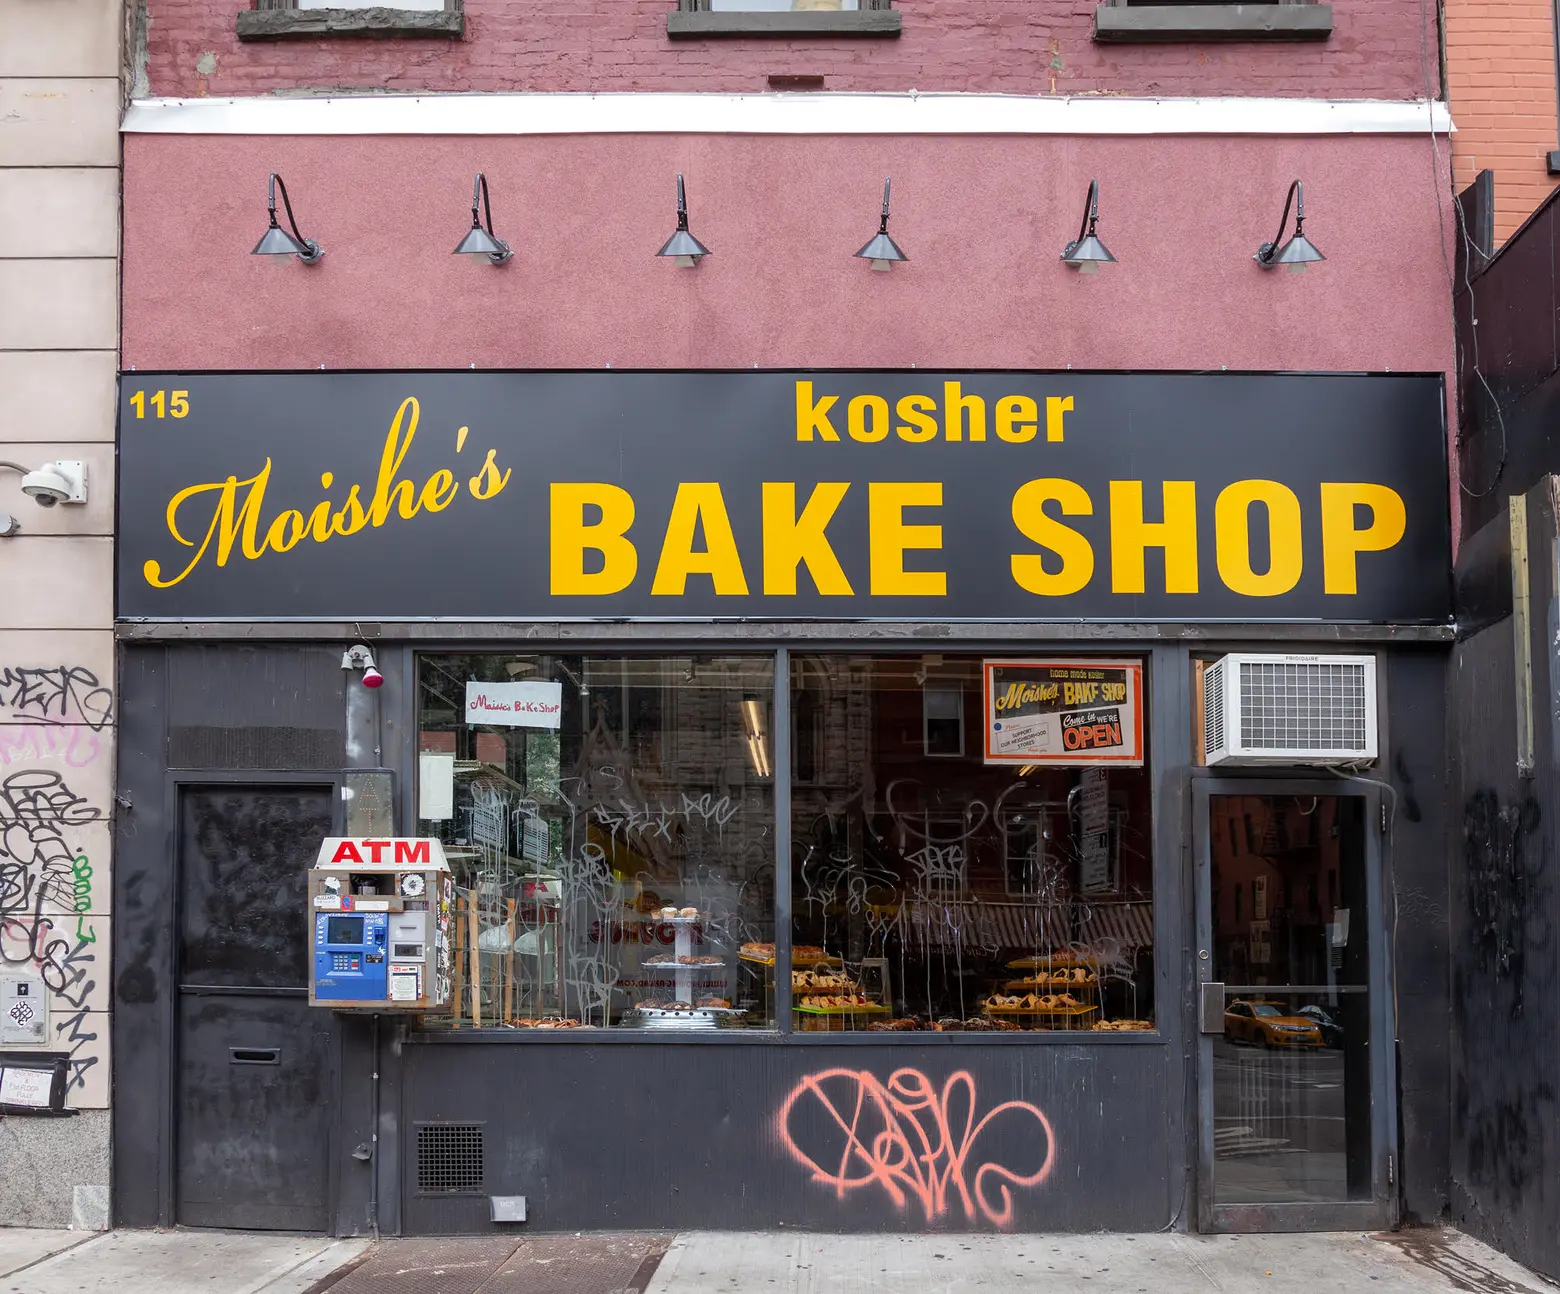 Moishe’s East Village kosher bakery has closed after 42 years